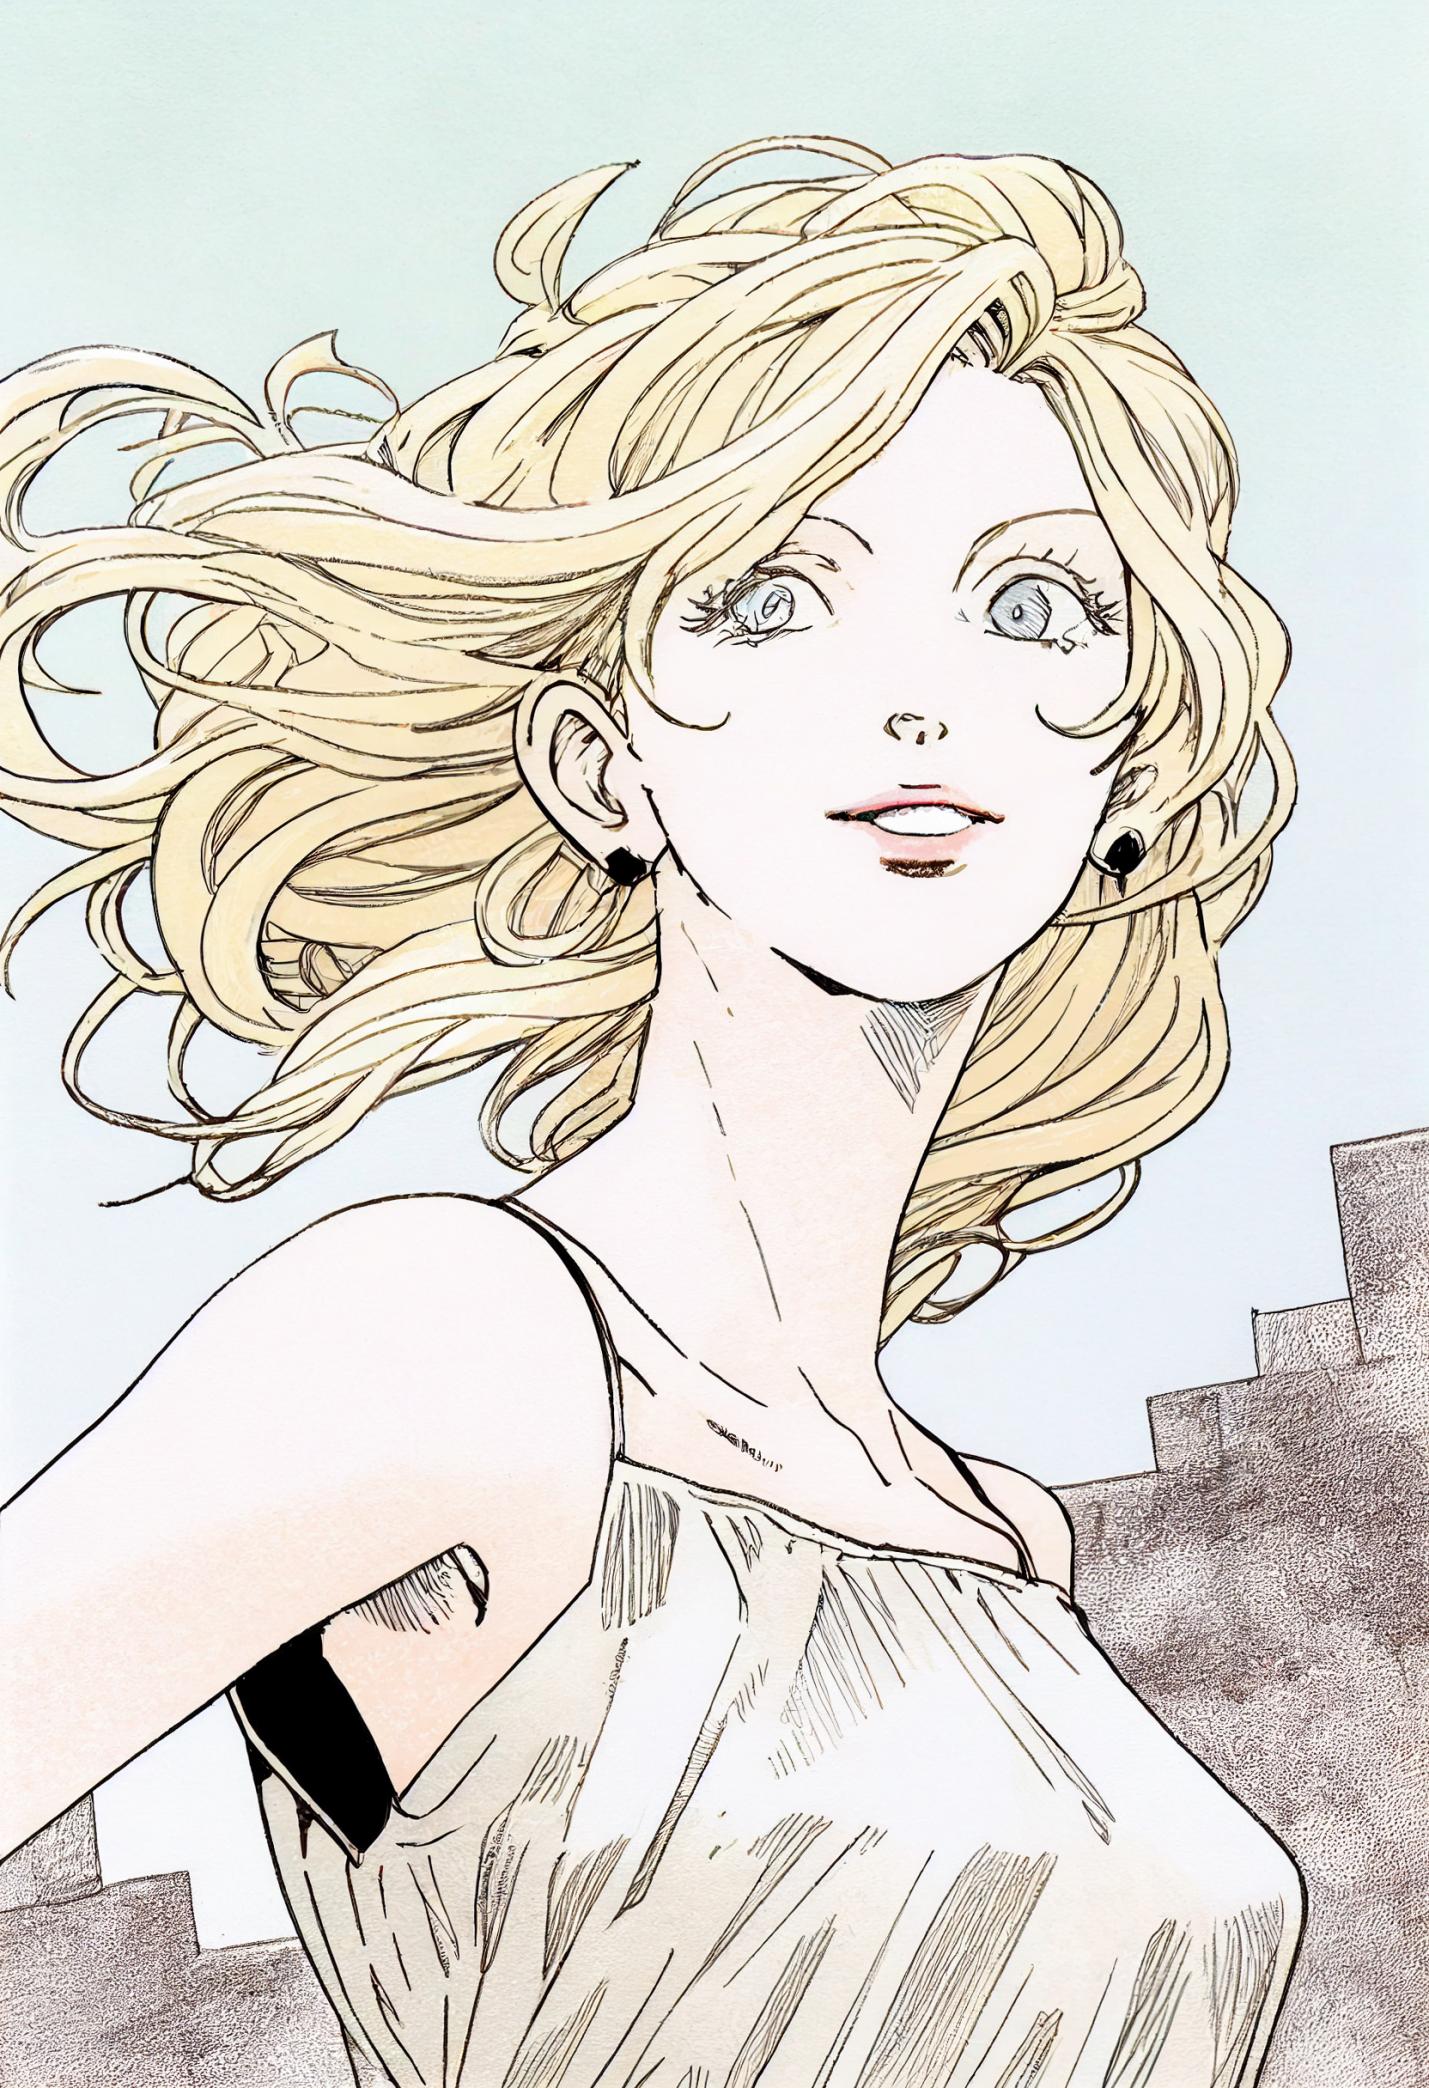 Bluewing_Beautiful_woman_by_Moto_Hagio_street_background_perspe_b61b904c-1162-48d6-82a8-33bc6d59bdc3.png